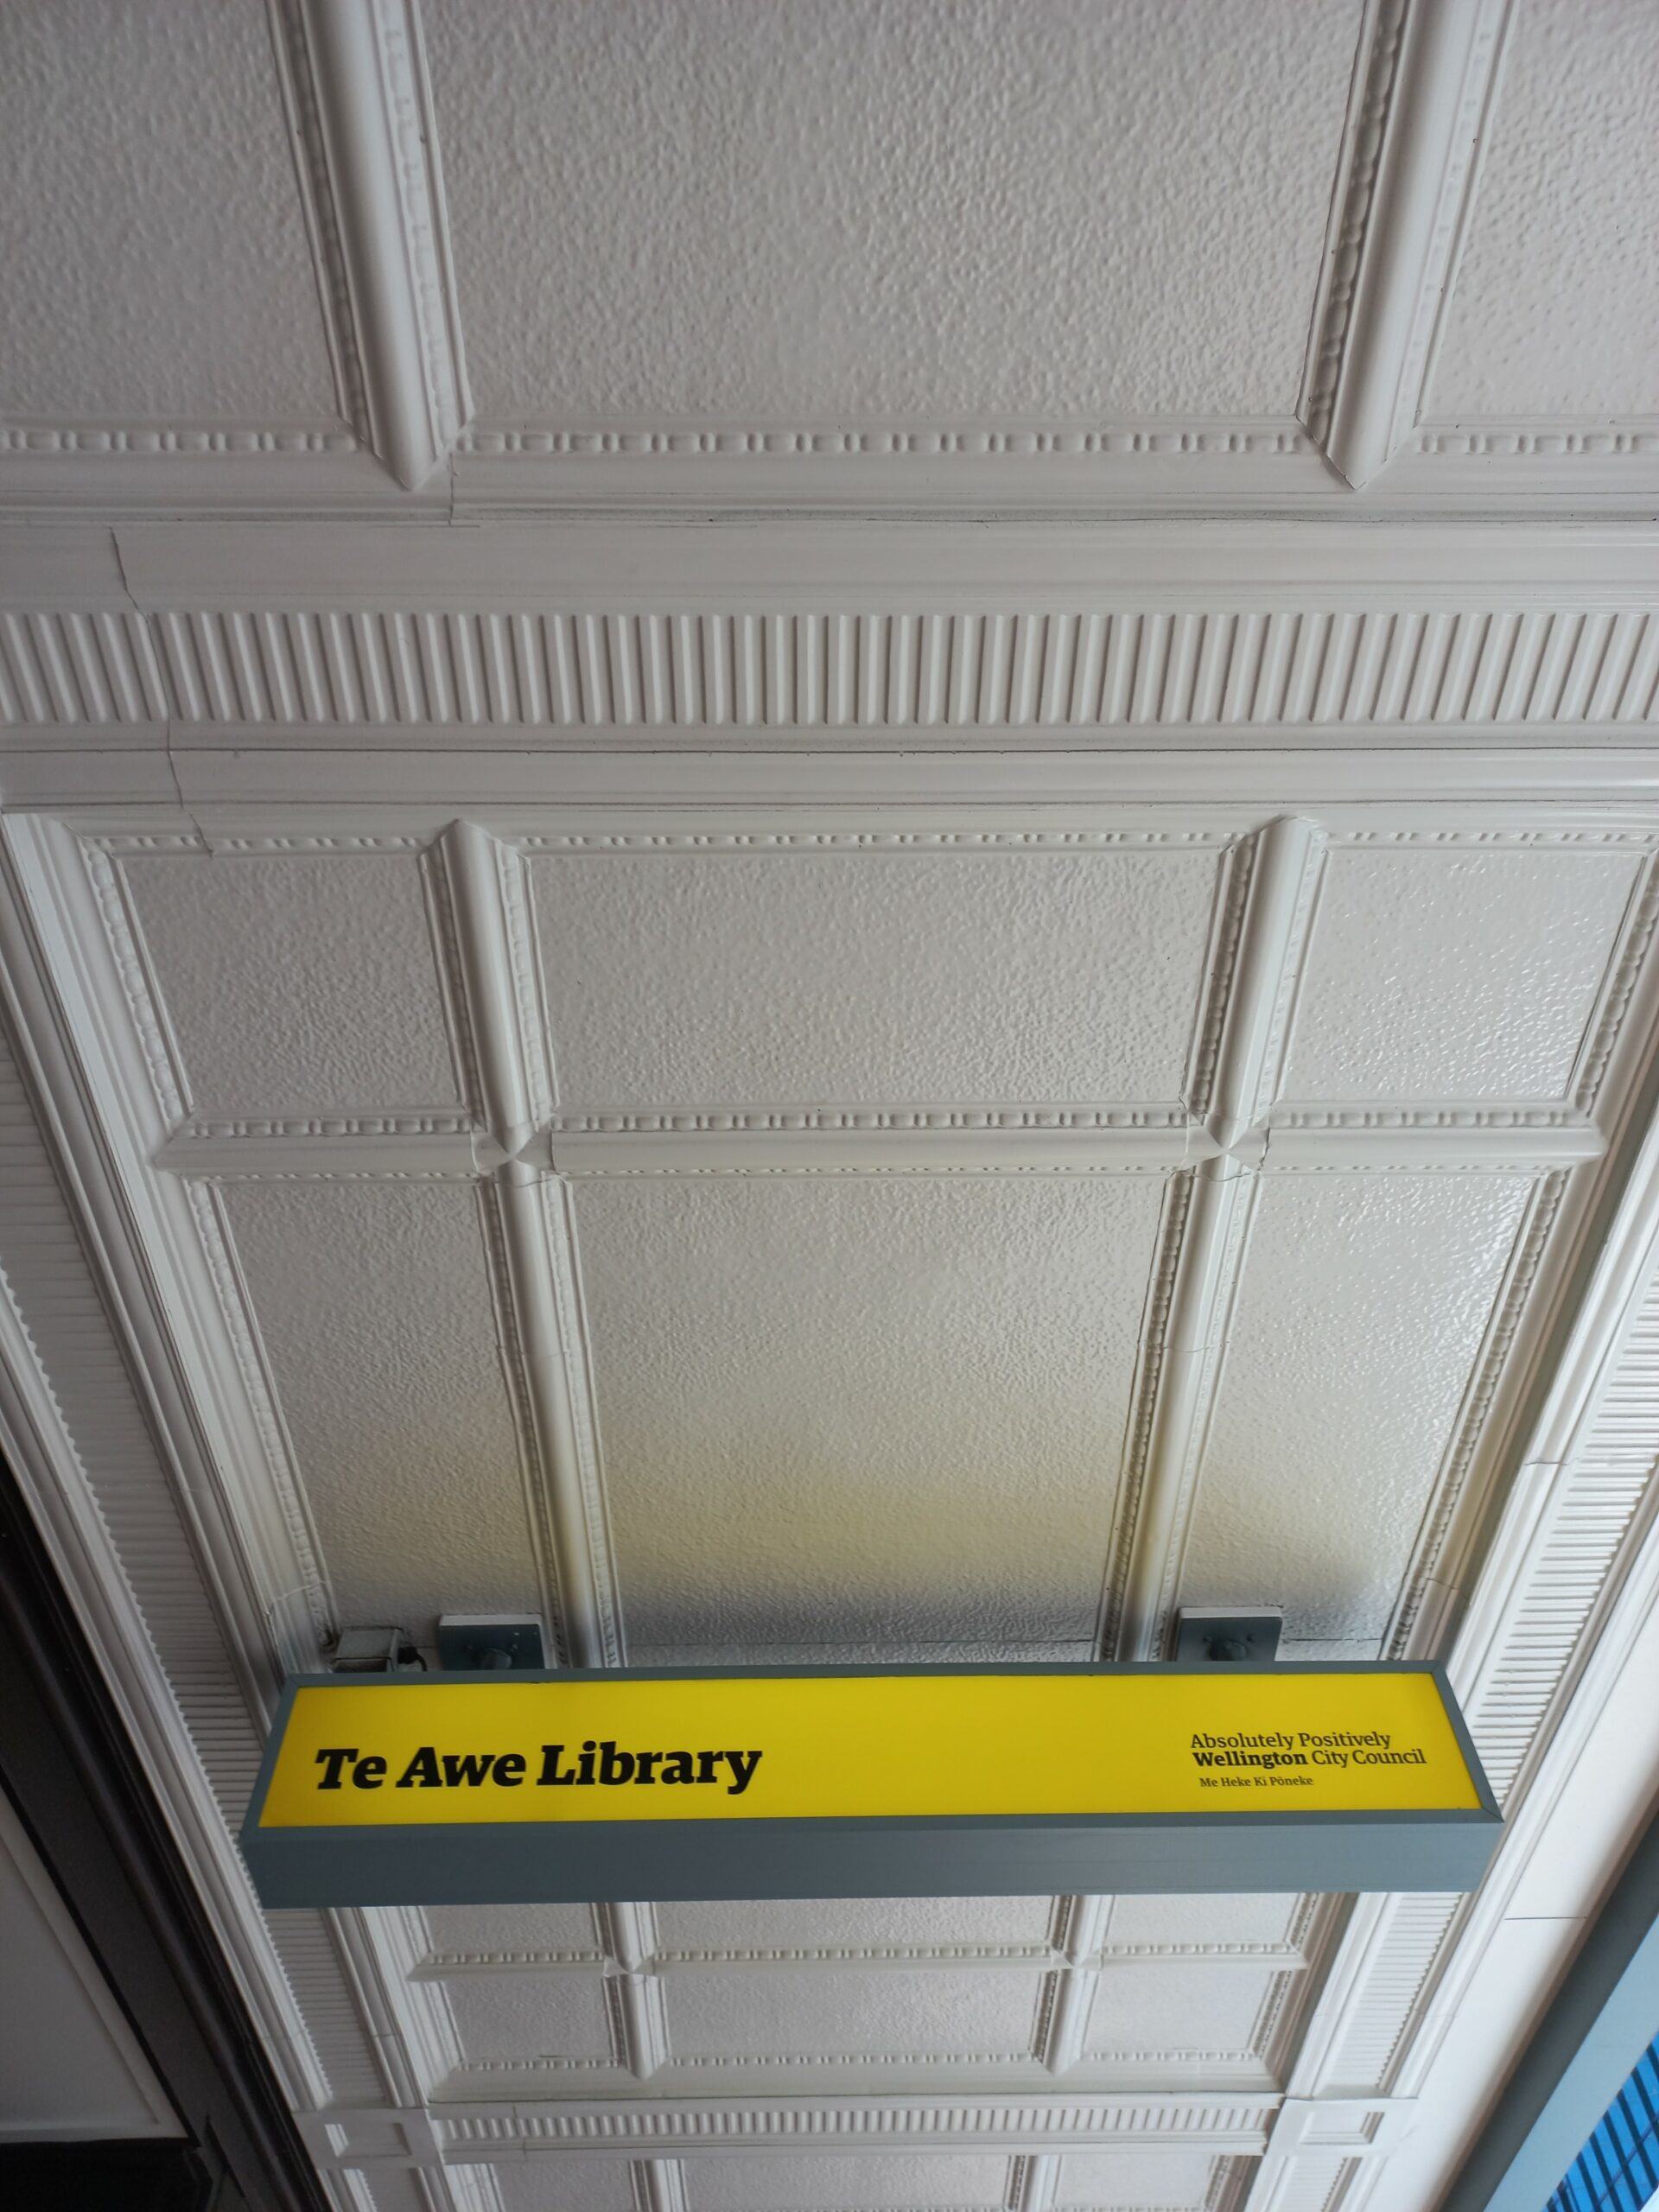 Decorated 1900s eave overhanging the footpath, with a yellow 'Te Awe Library' sign hanging from it.